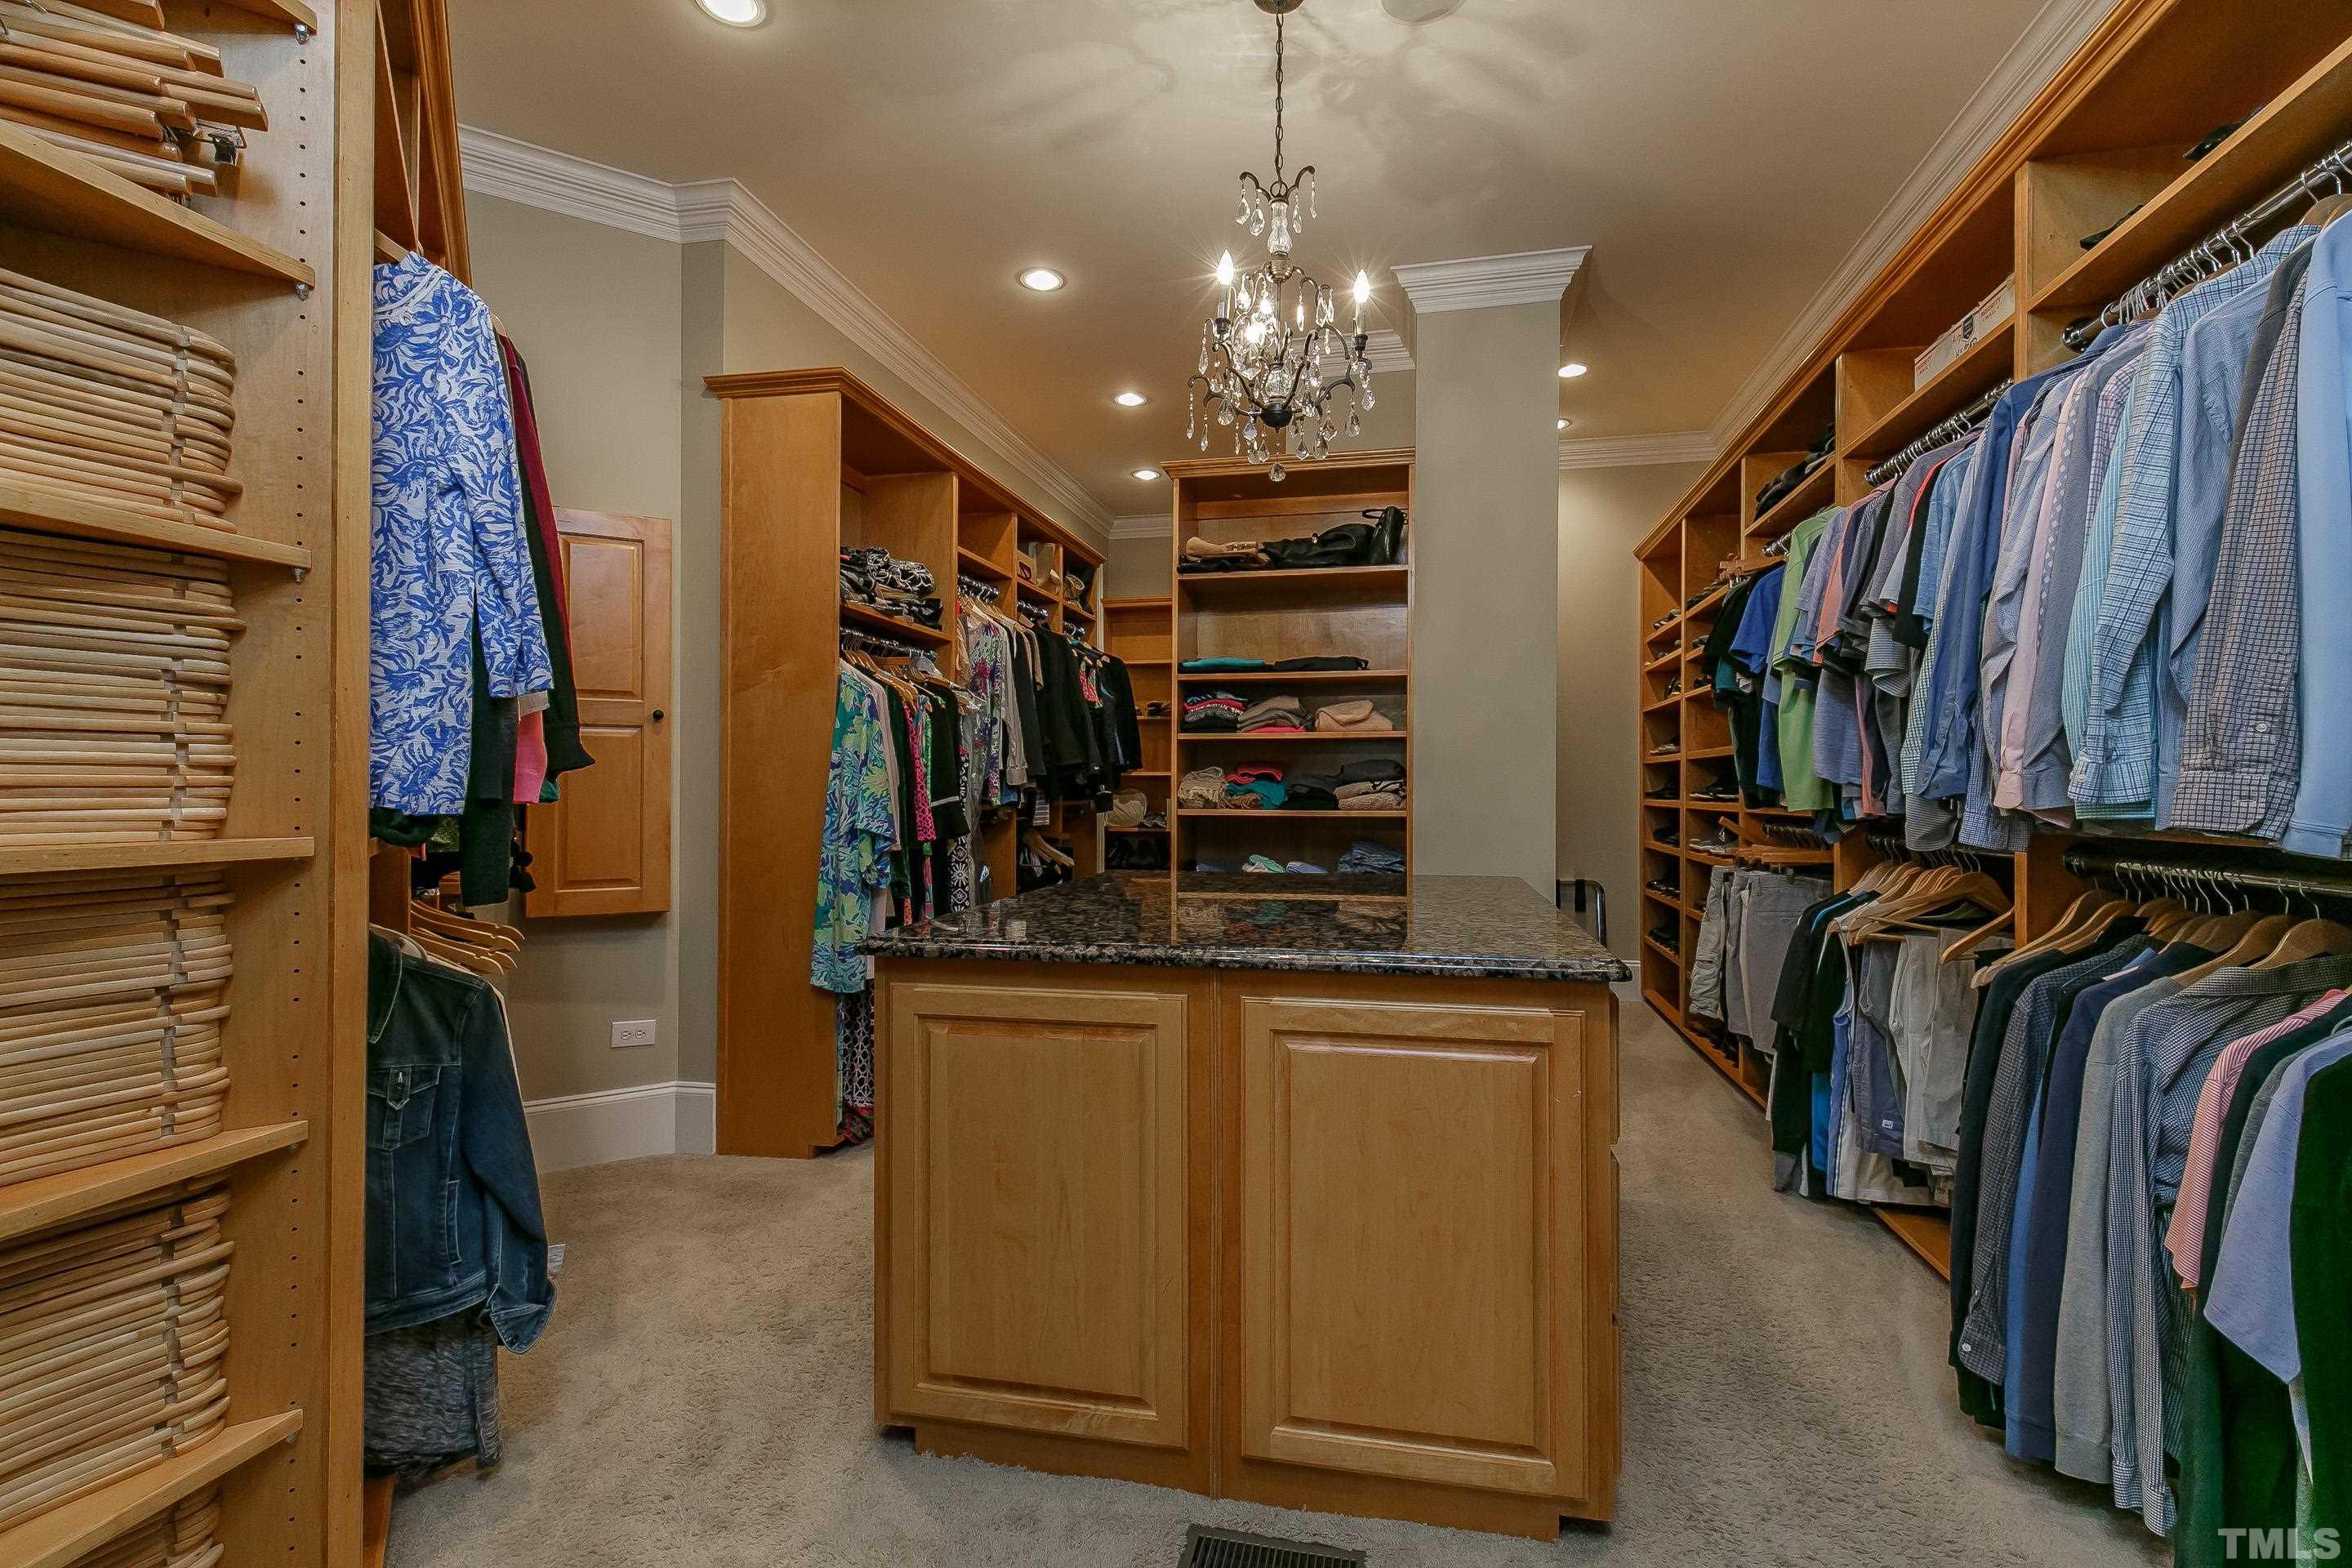 ONE of a KIND custom closet with wood organizers: granite closet island, shoe rack, shelves and built-in ironing board